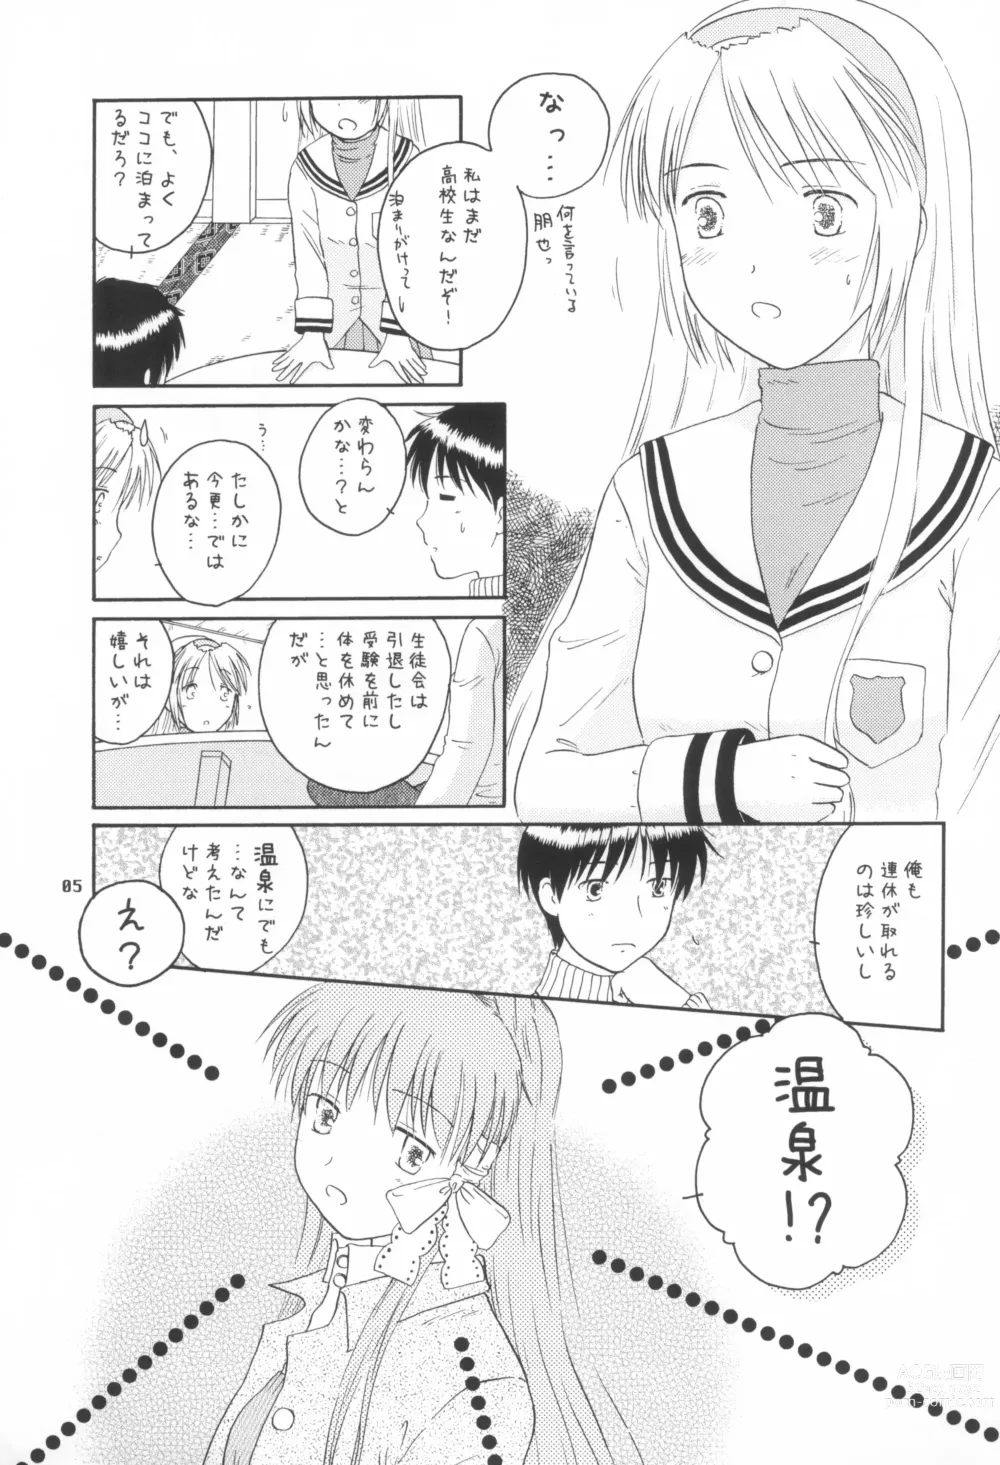 Page 4 of doujinshi A Happy Life